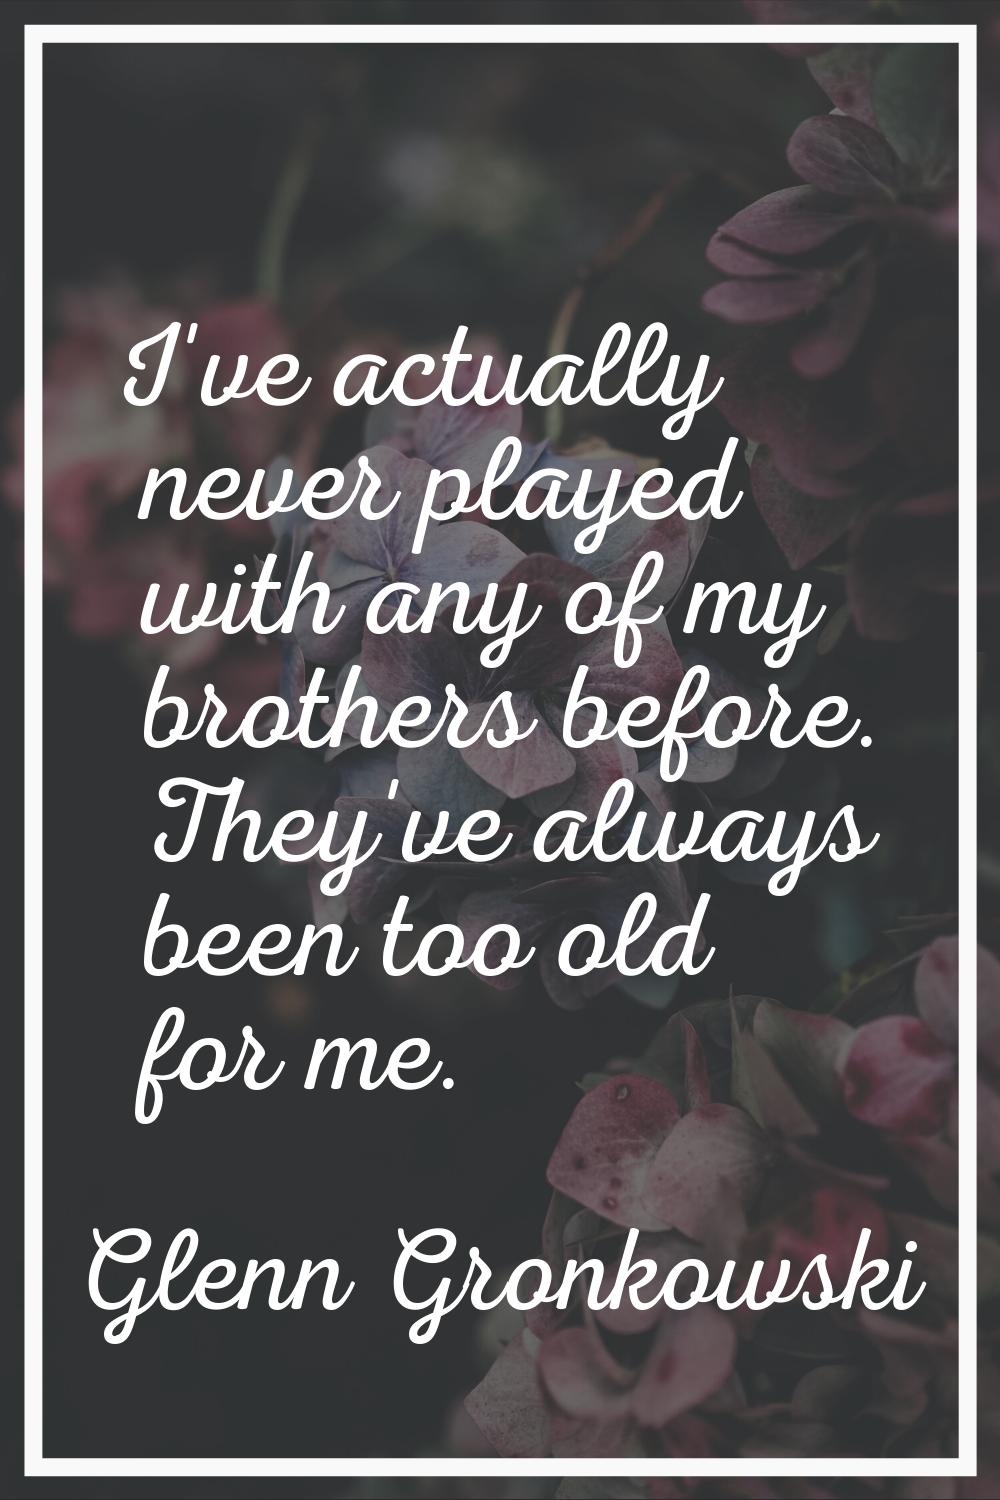 I've actually never played with any of my brothers before. They've always been too old for me.